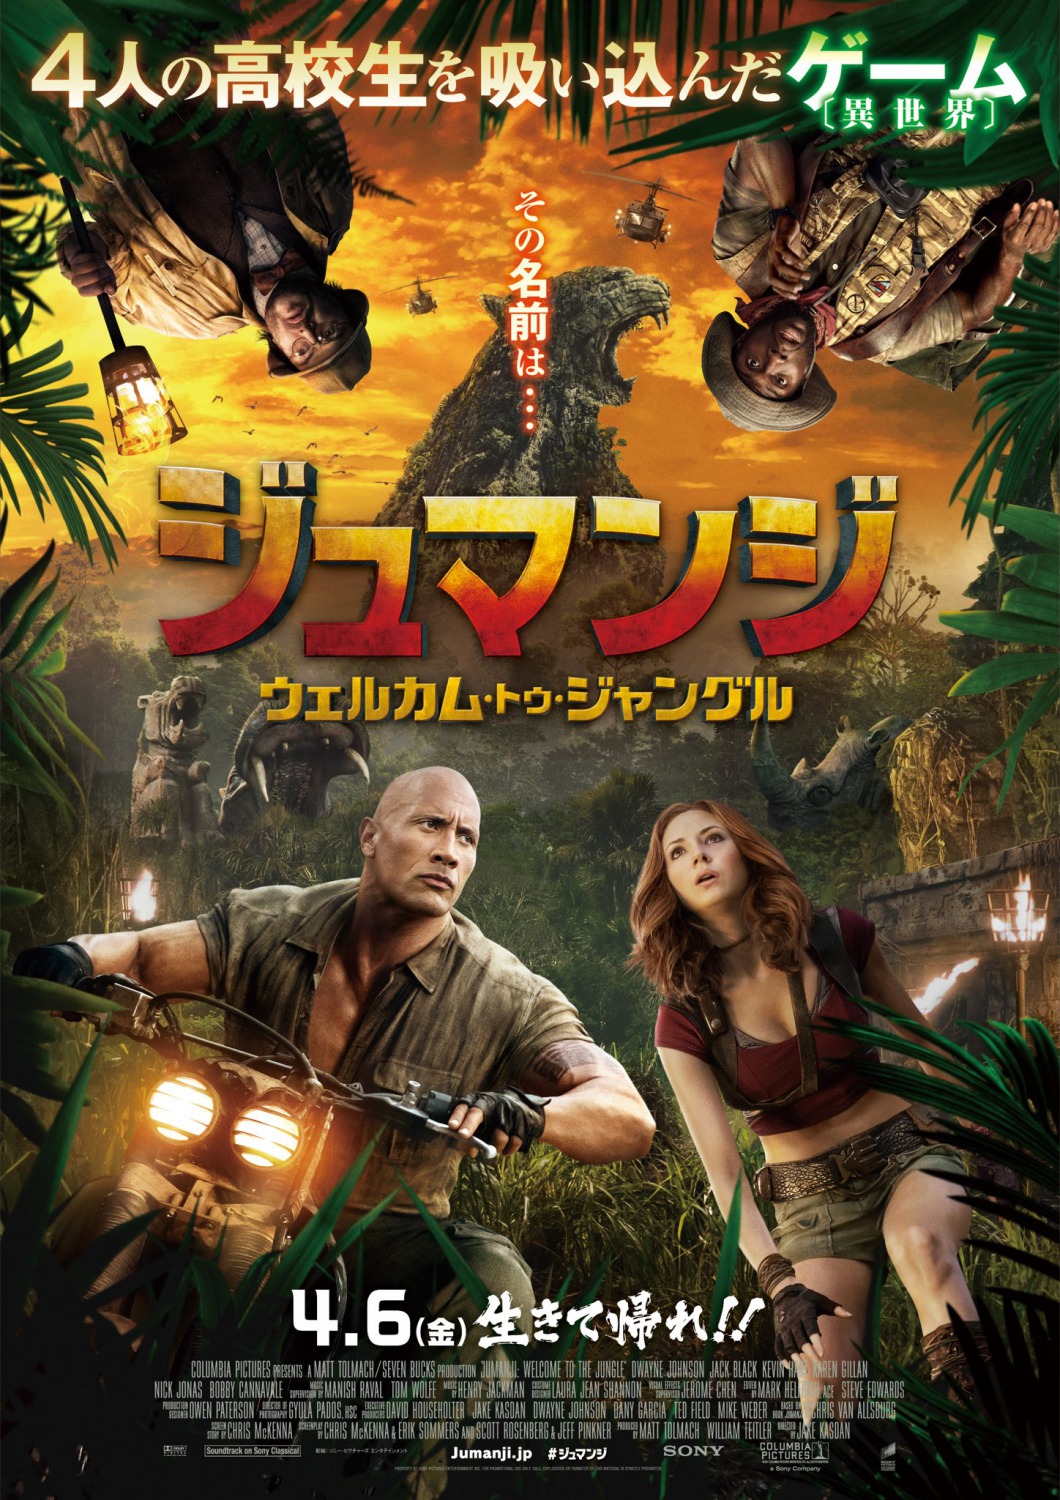 Extra Large Movie Poster Image for Jumanji: Welcome to the Jungle (#21 of 22)